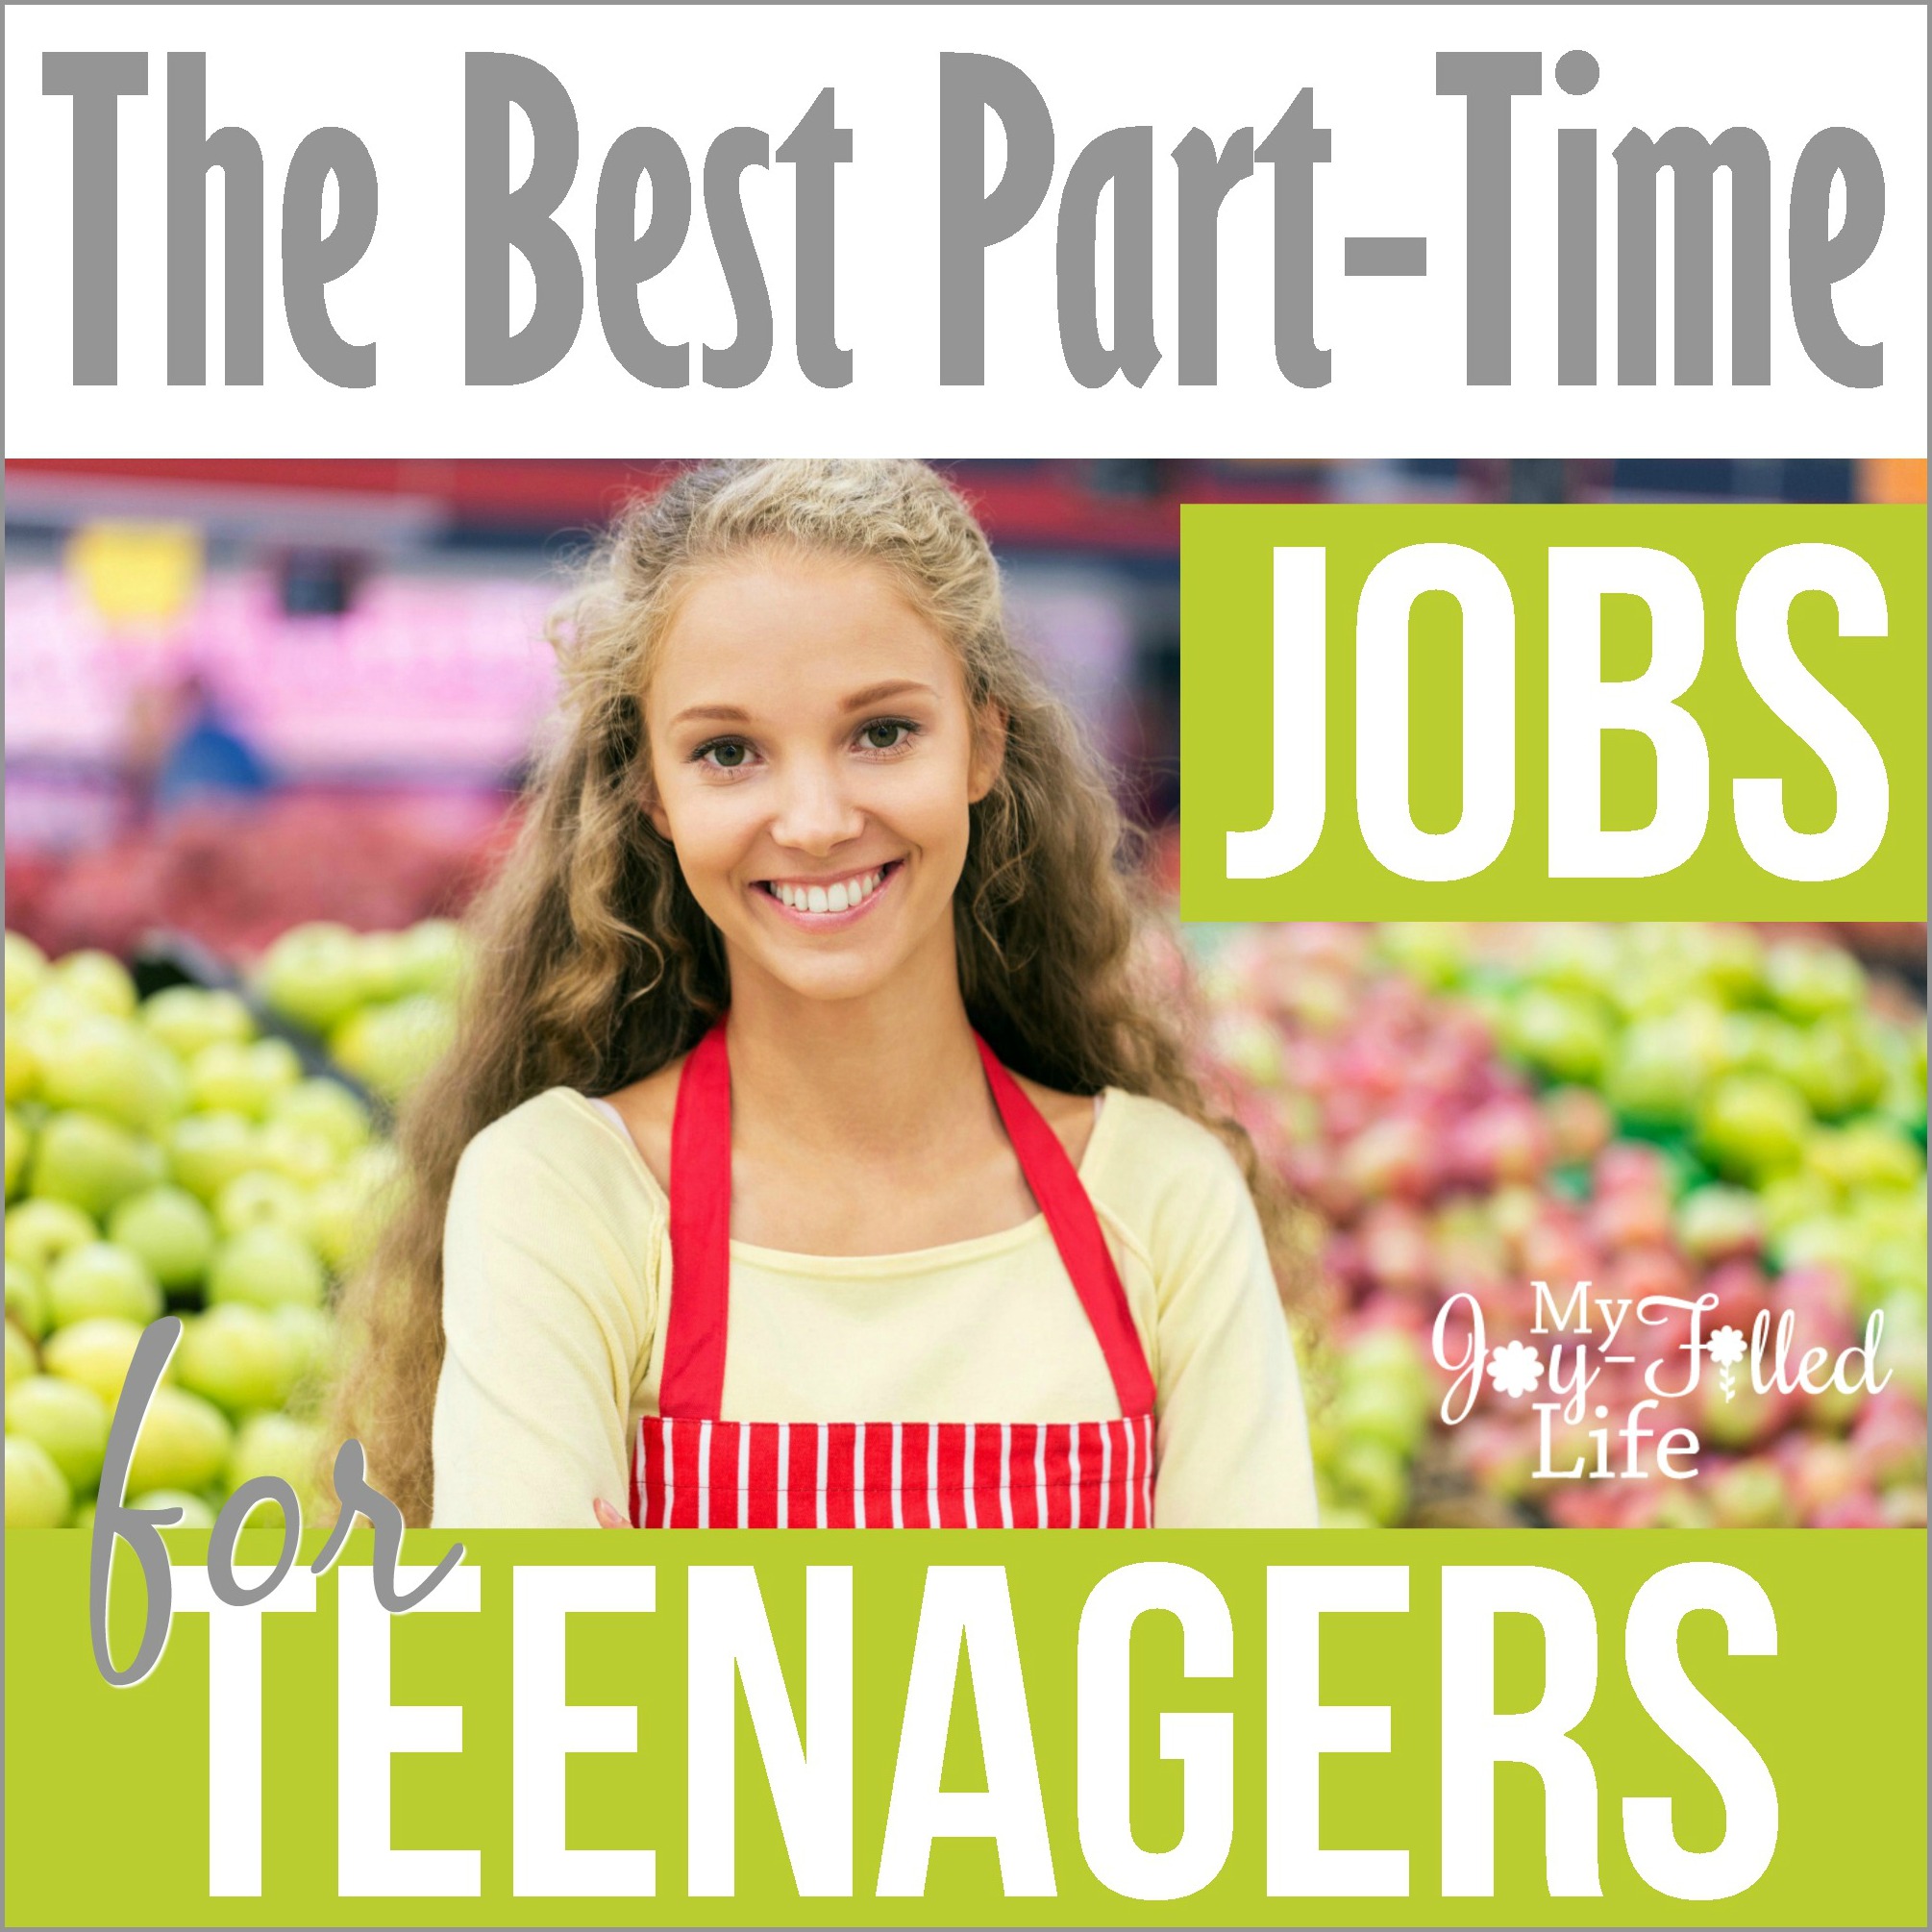 Part time jobs in maryland for teenagers